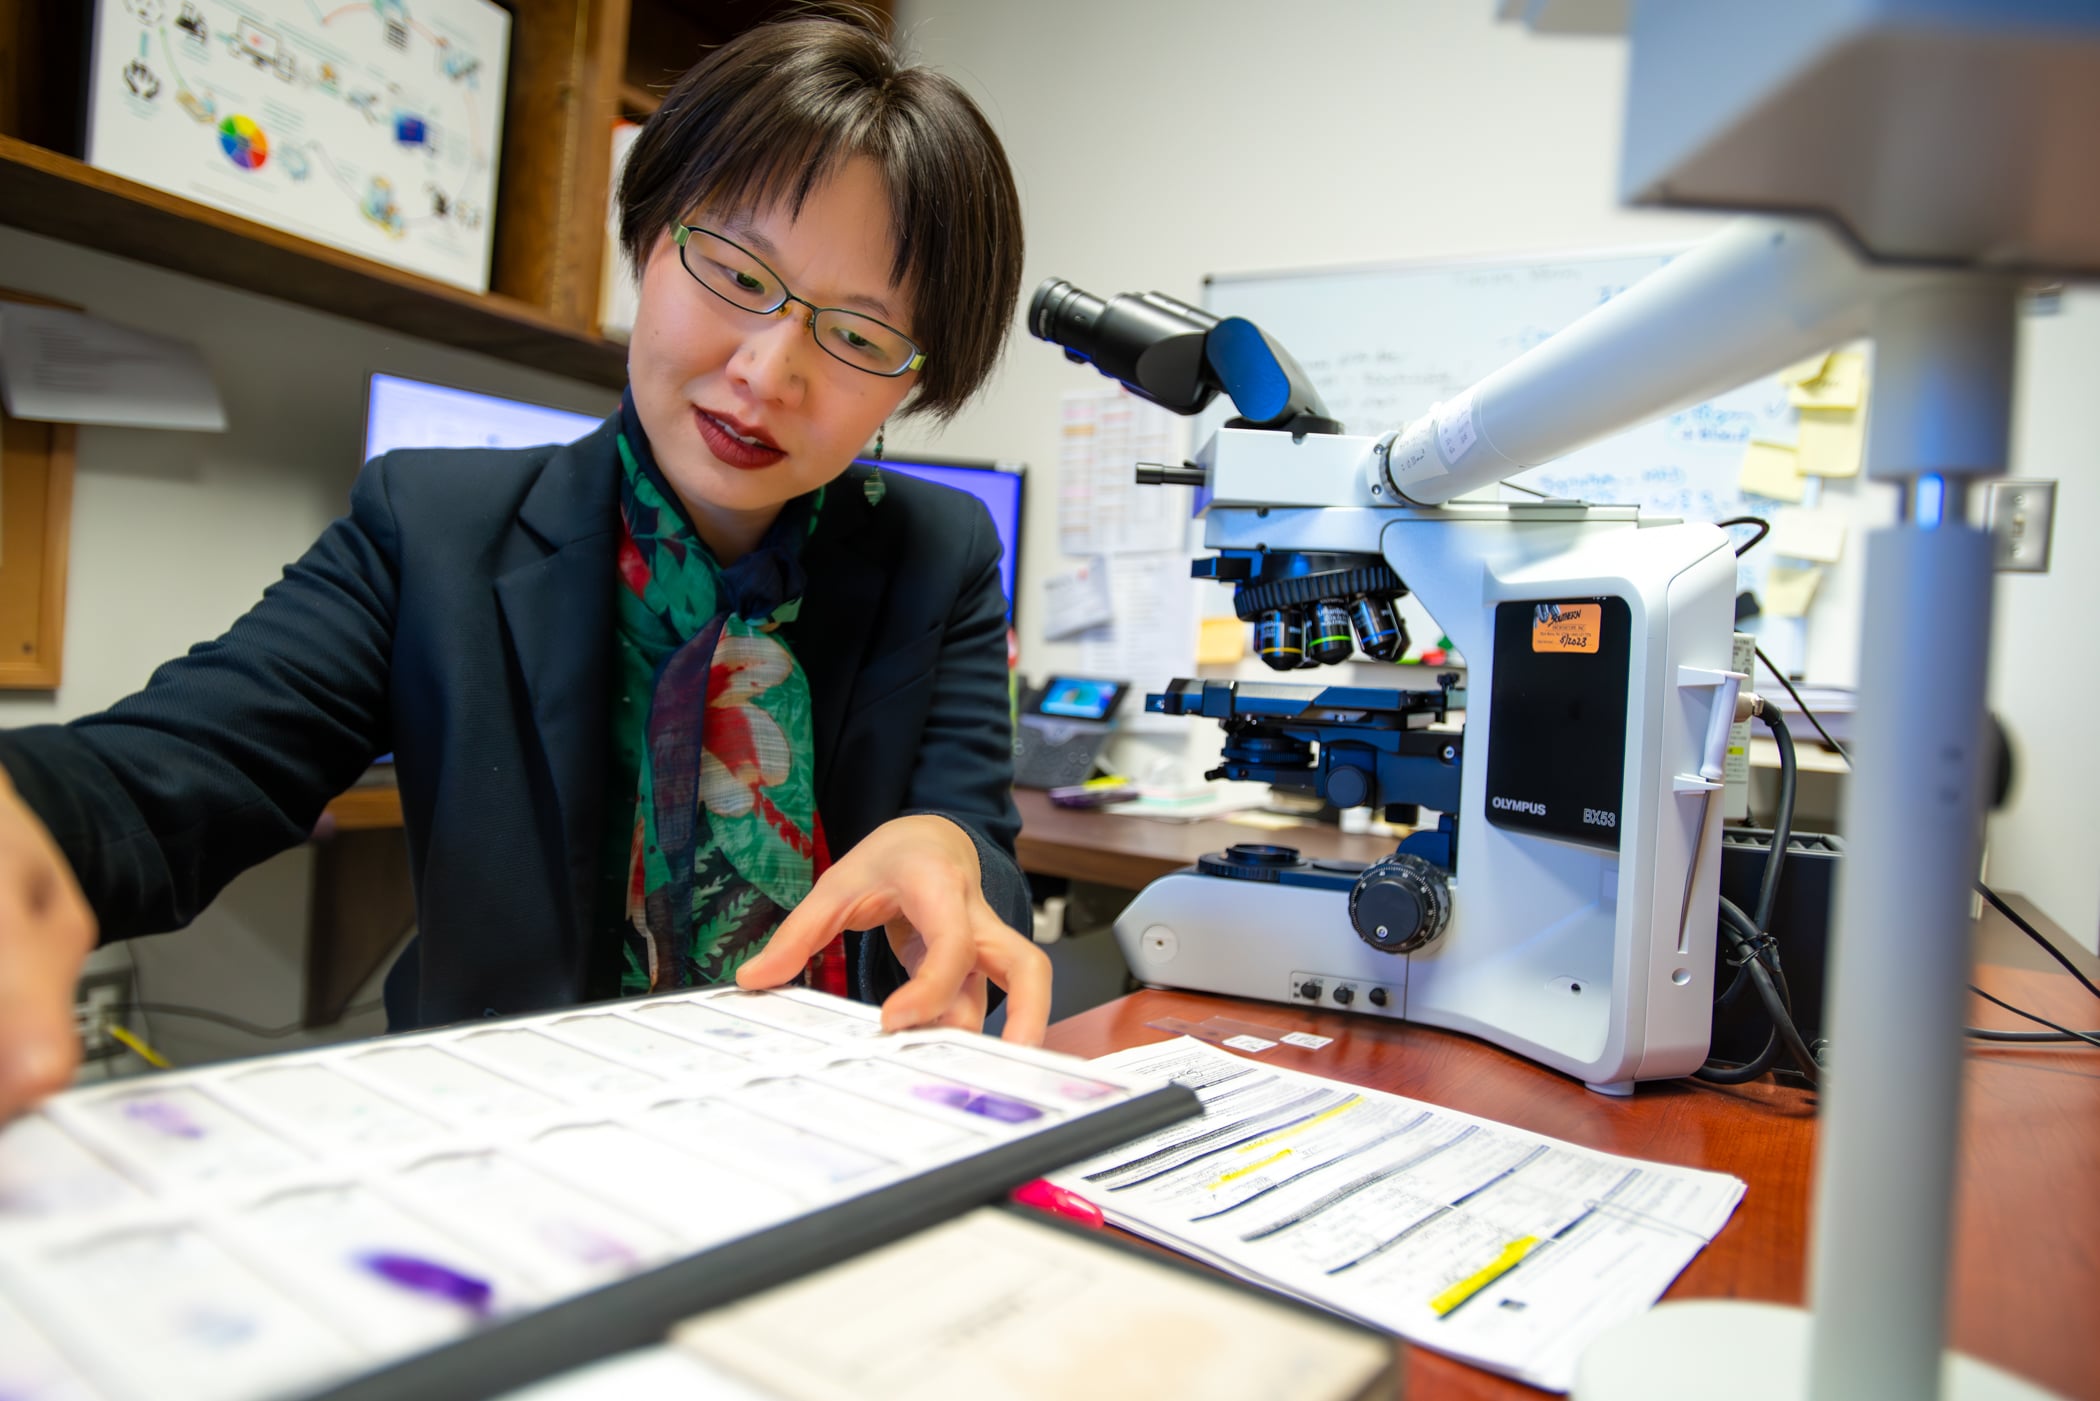 Dr. Yaolin Zhou makes notes during an examination of a sample.